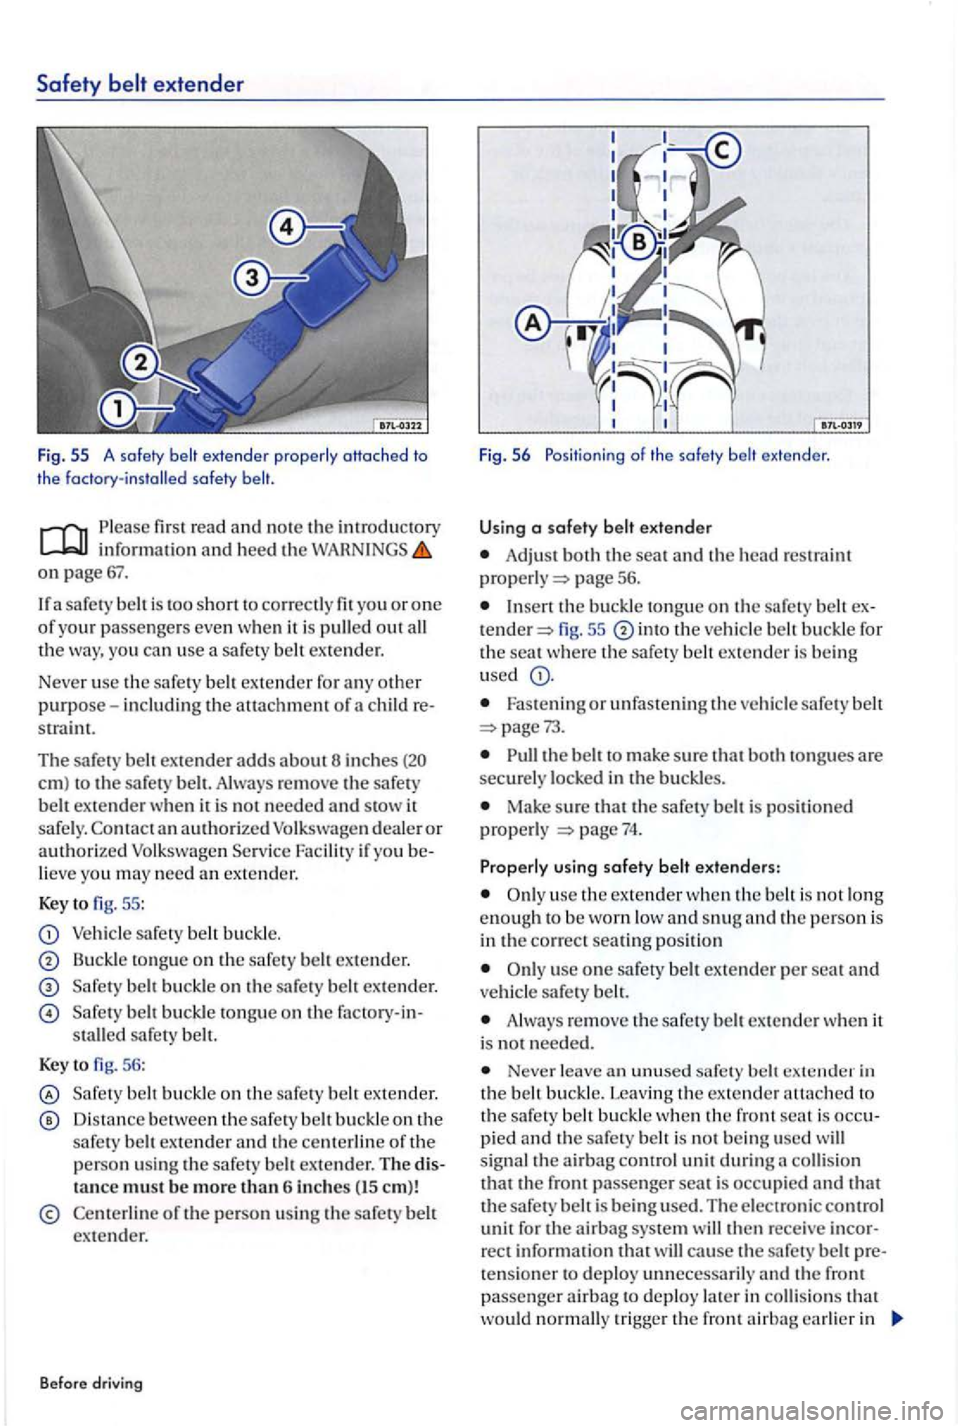 VOLKSWAGEN GOLF PLUS 2004  Owners Manual Safety extender 
Fig. 55 A  safety belt 
fir st  read  and no te the in troducto ry in formatio n  and heed th e on page 67. 
a safet y is  too shonto correctly  fit  you or one of your passe nge rs  